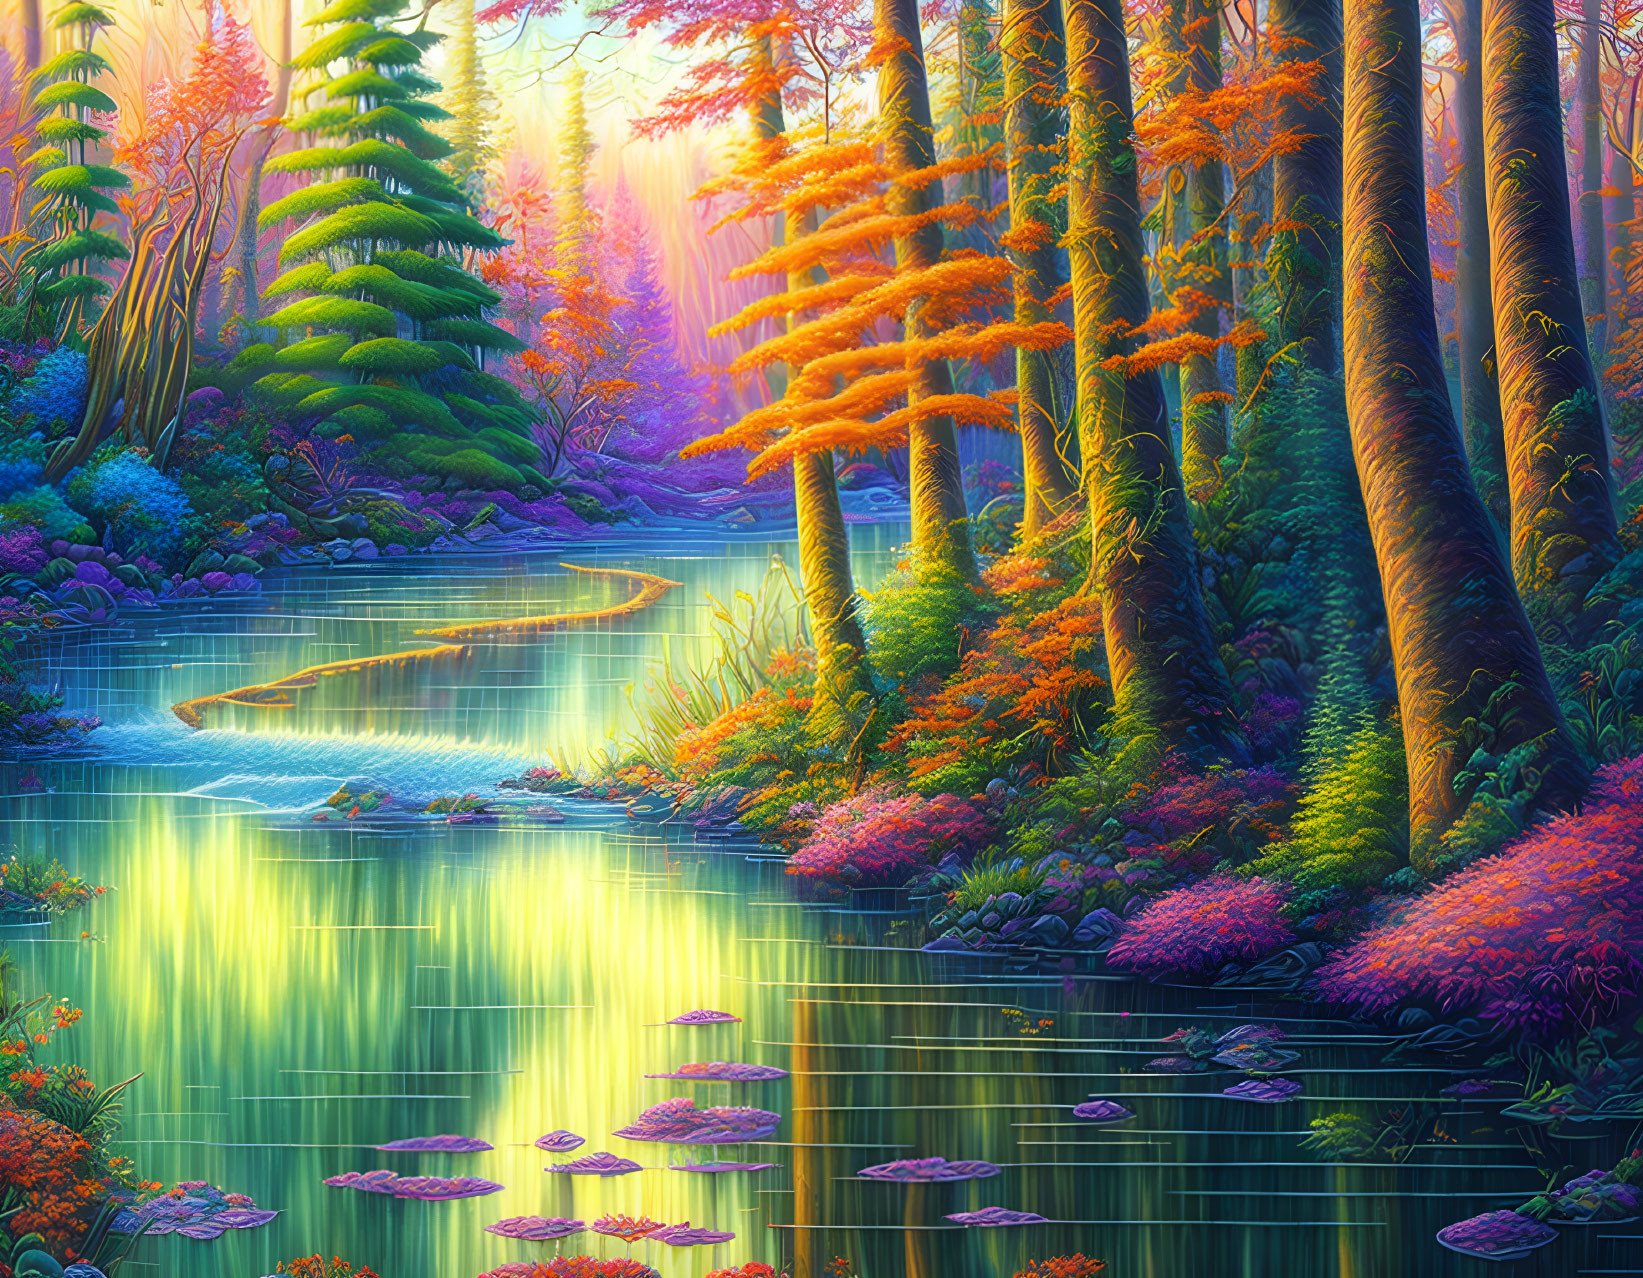 Colorful Fantasy Forest with River and Sunrays